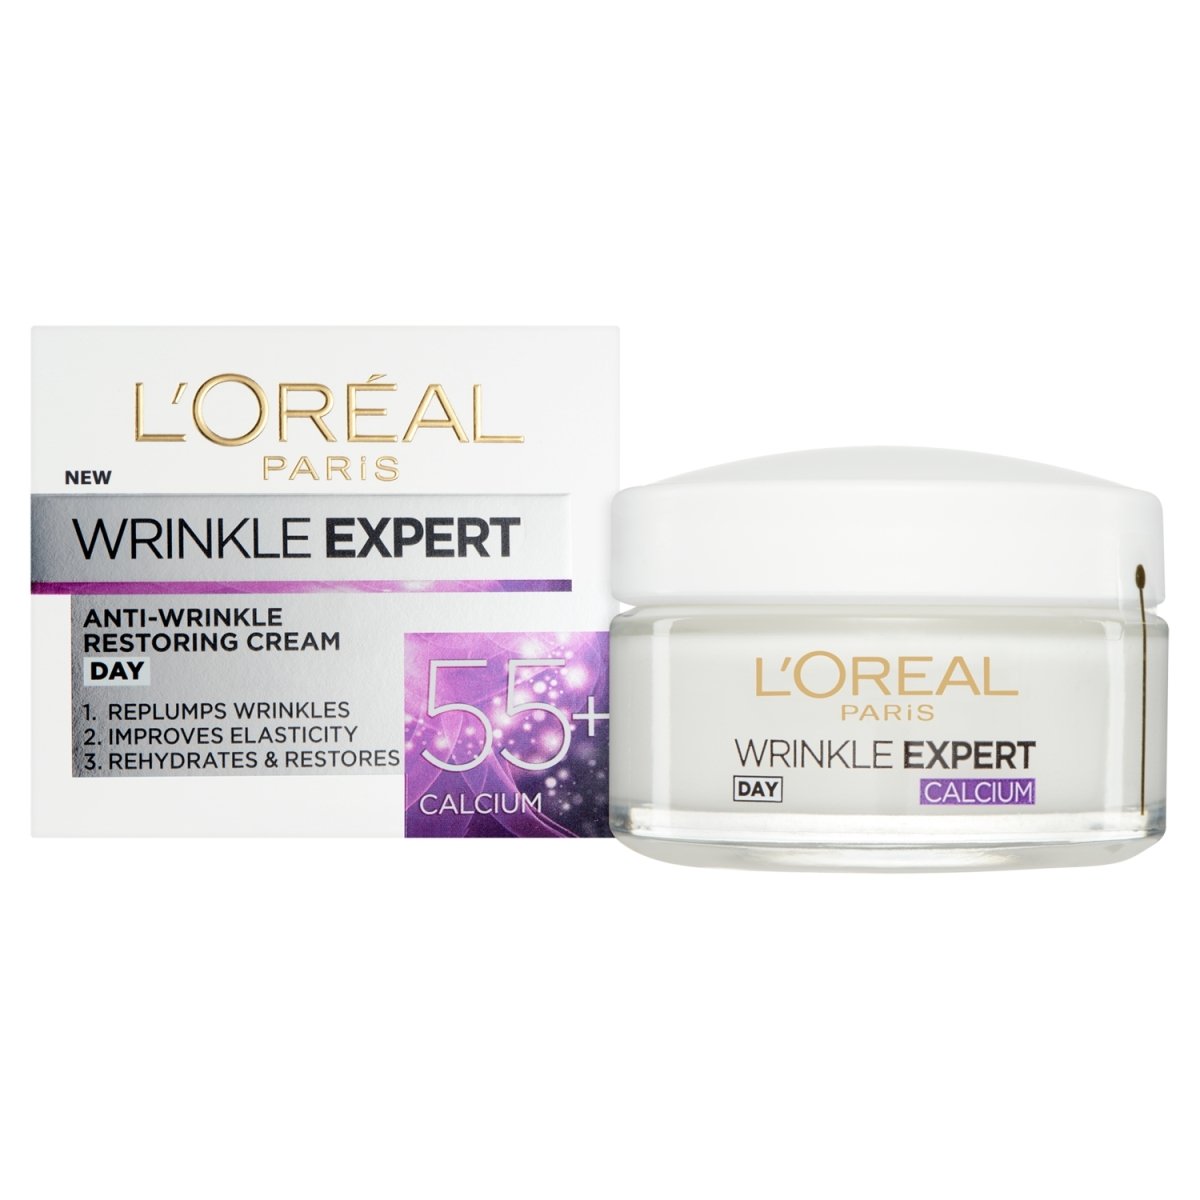 L'Oreal Skin Expert Dermo Wrinkle 55+ Day Pot - Intamarque 3600523183500